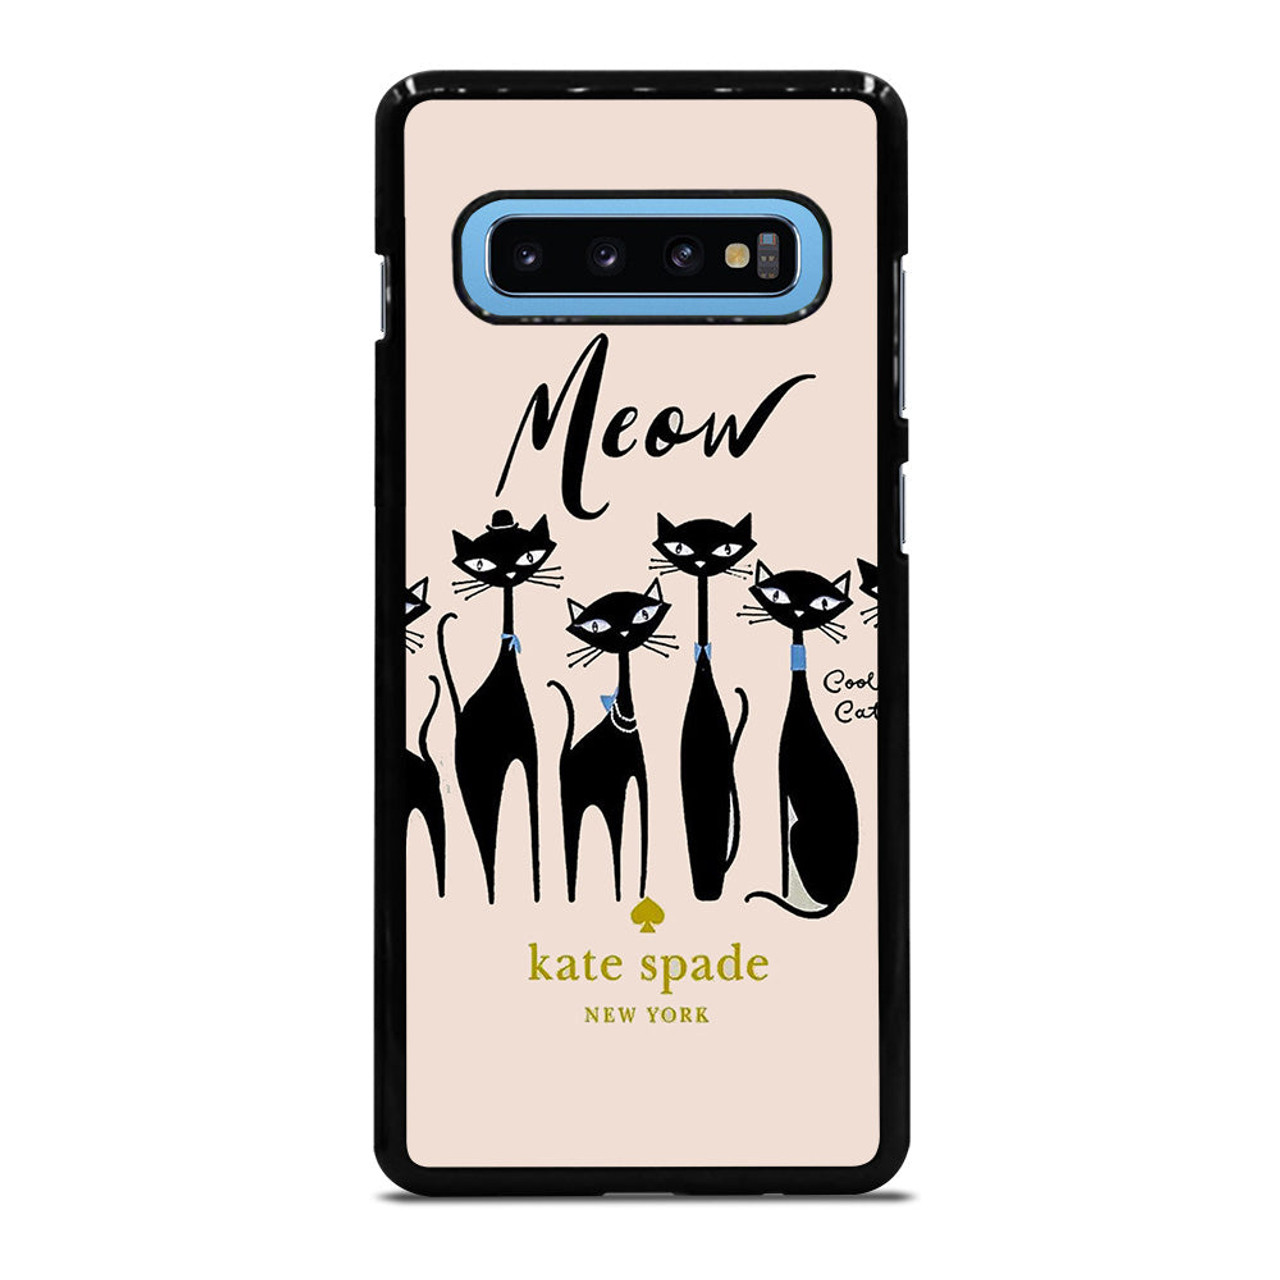 KATE SPADE MEOW CAT Samsung Galaxy S10 Plus Case Cover